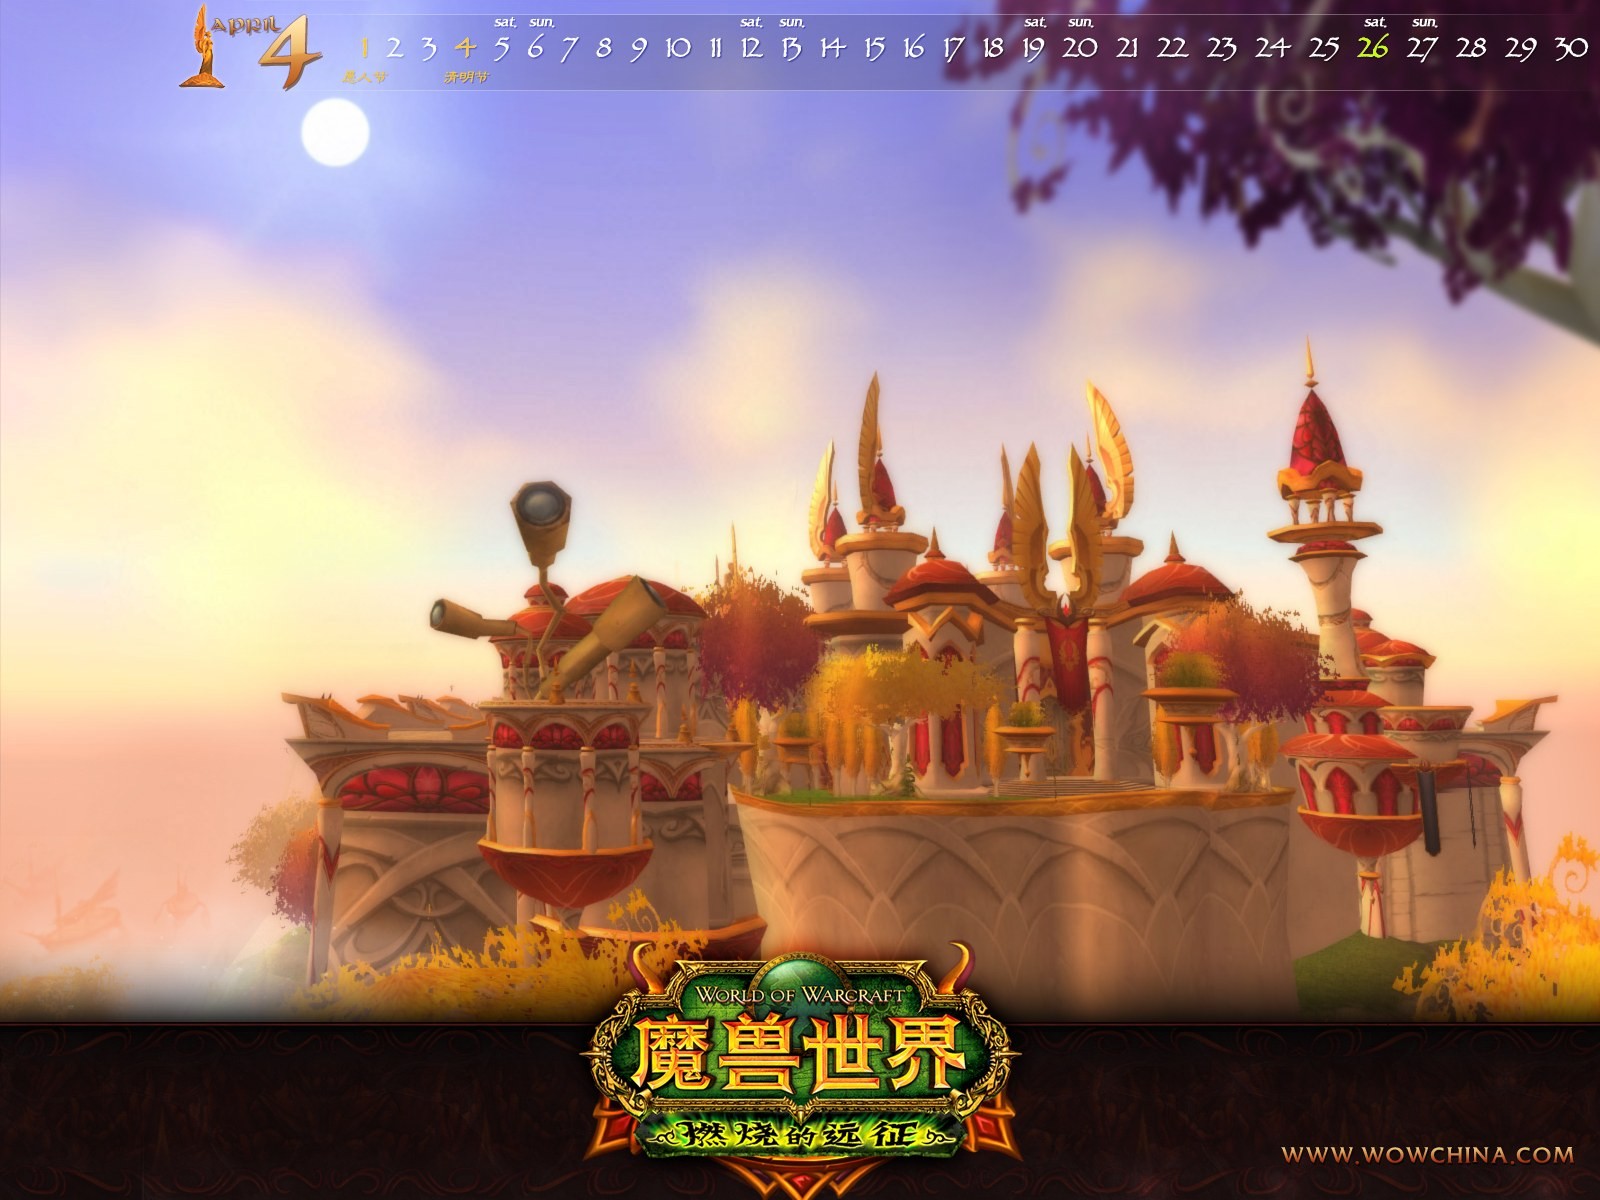 World of Warcraft: The Burning Crusade's official wallpaper (2) #18 - 1600x1200